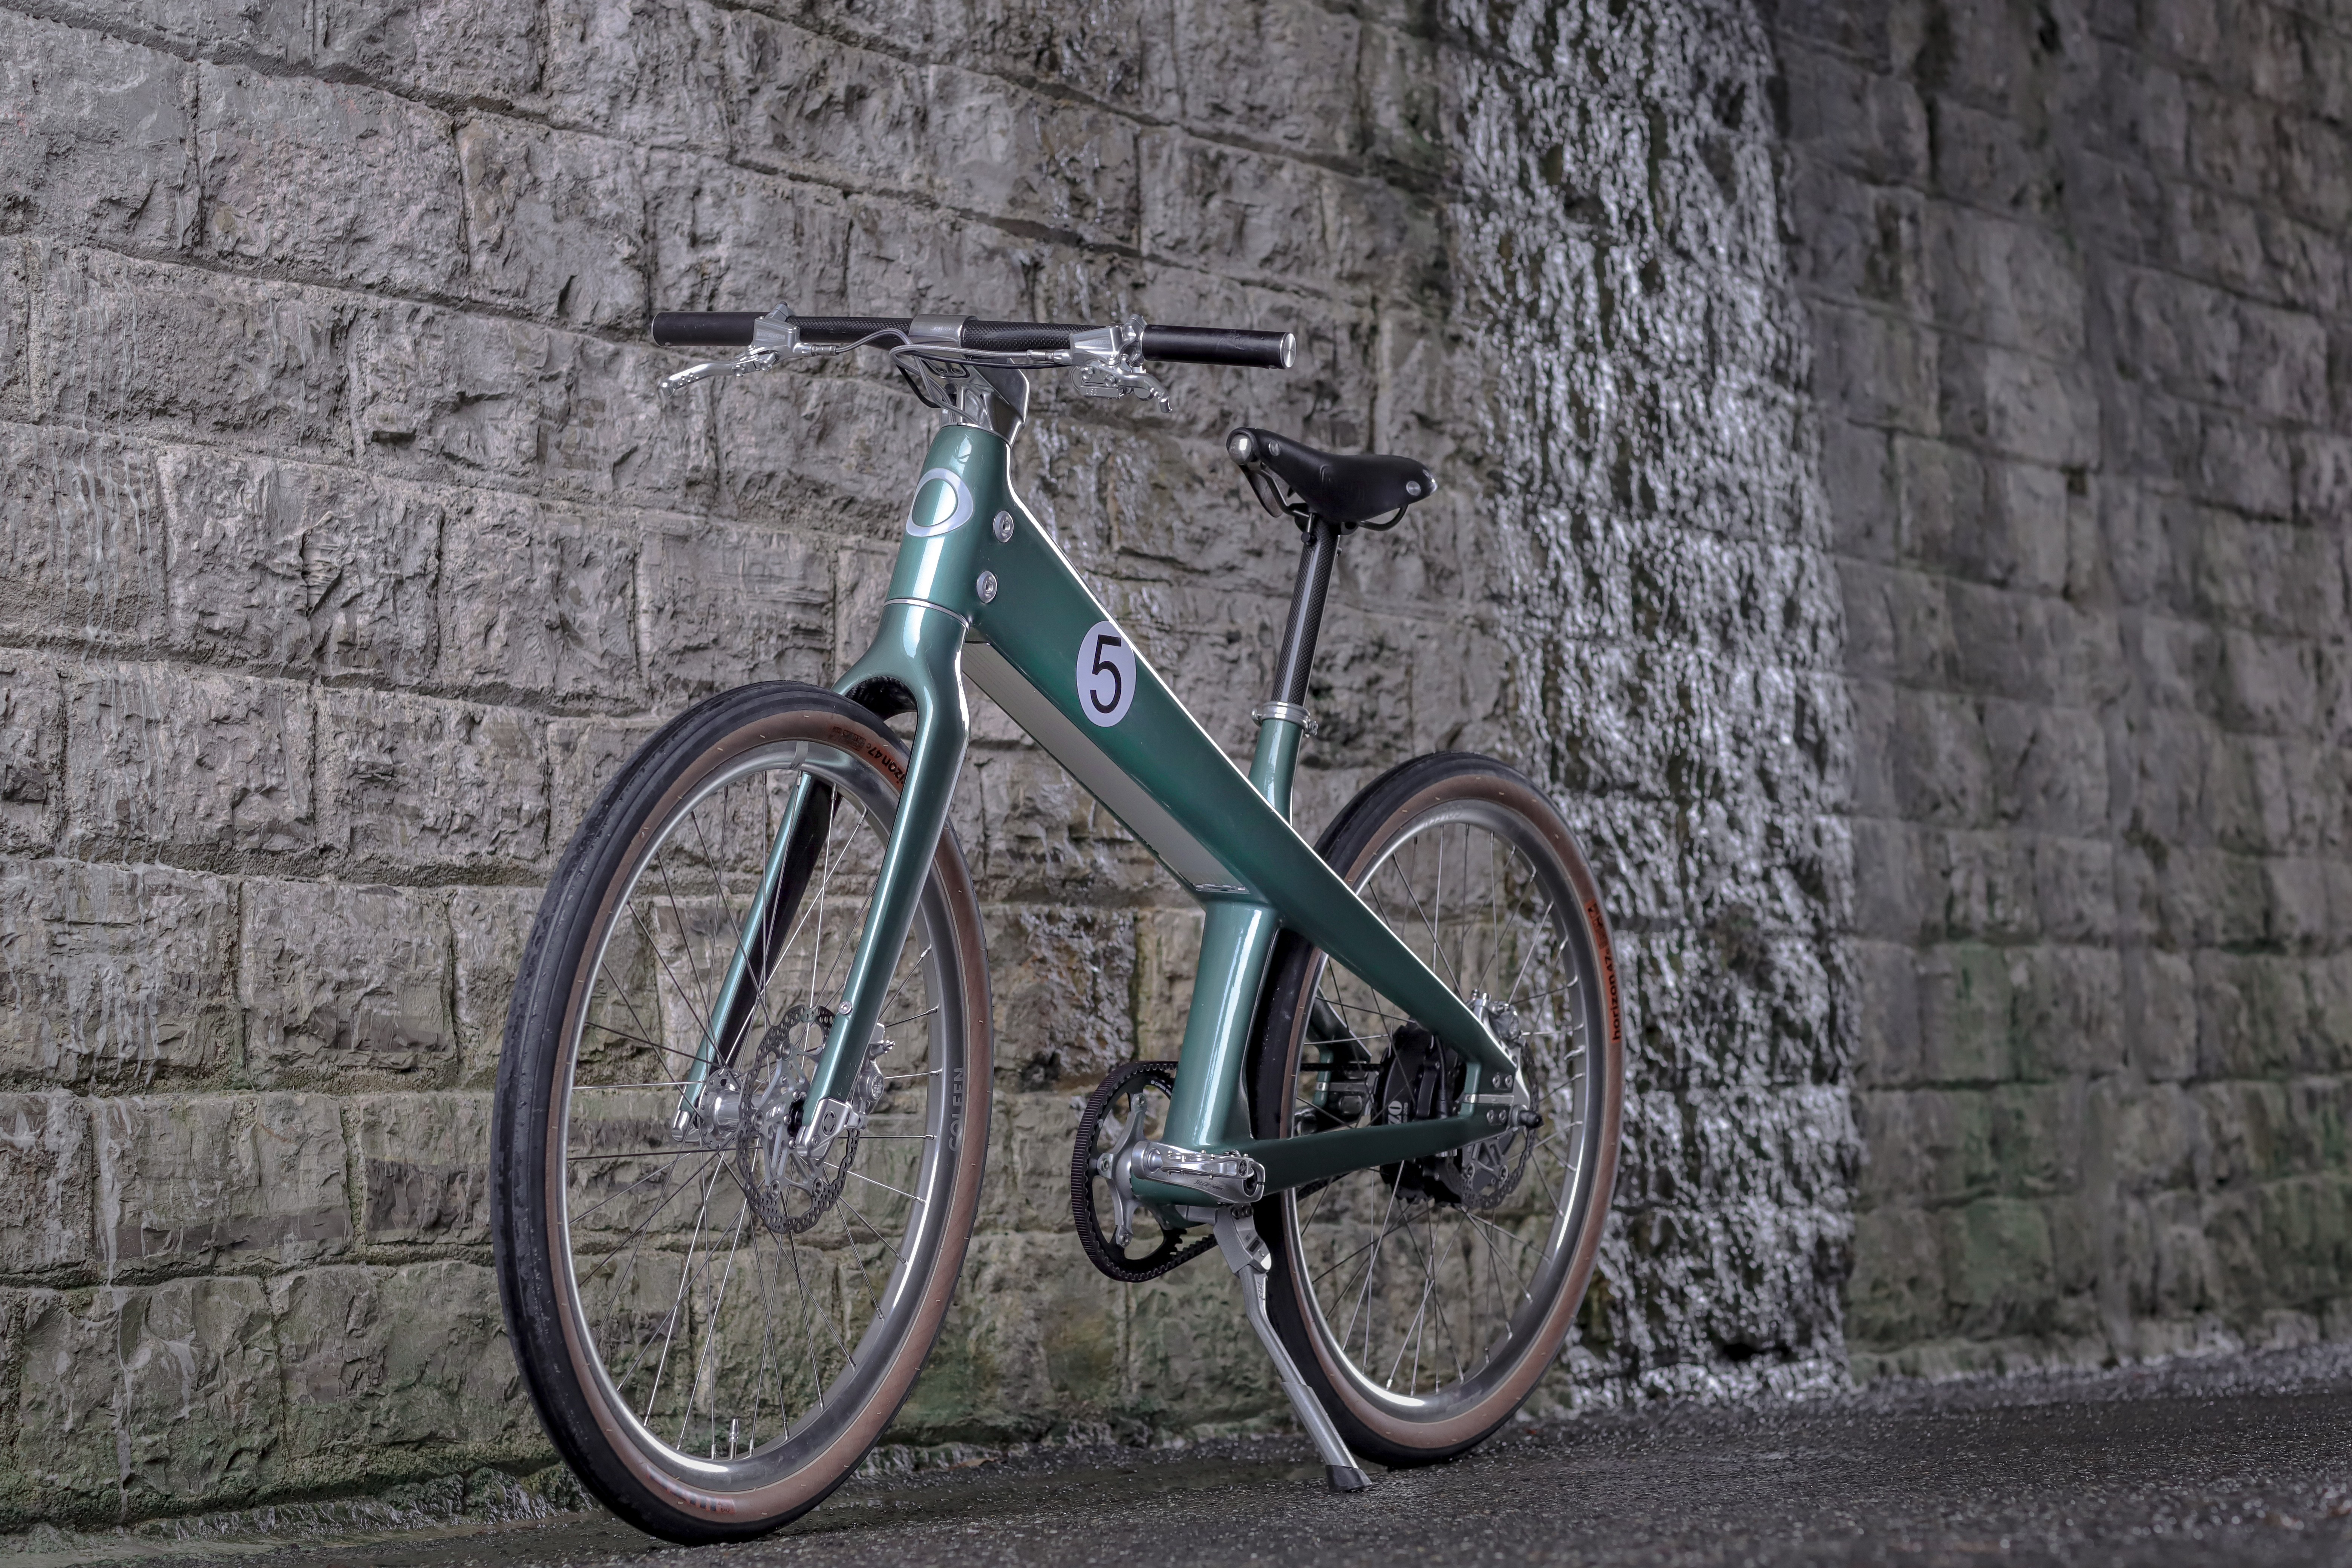 The limited-edition Coleen bike, in collaboration with Aston Martin, was made to honour Carroll Shelby’s 1959 victory in the 24 Hours of Le Mans. Photo: Coleen